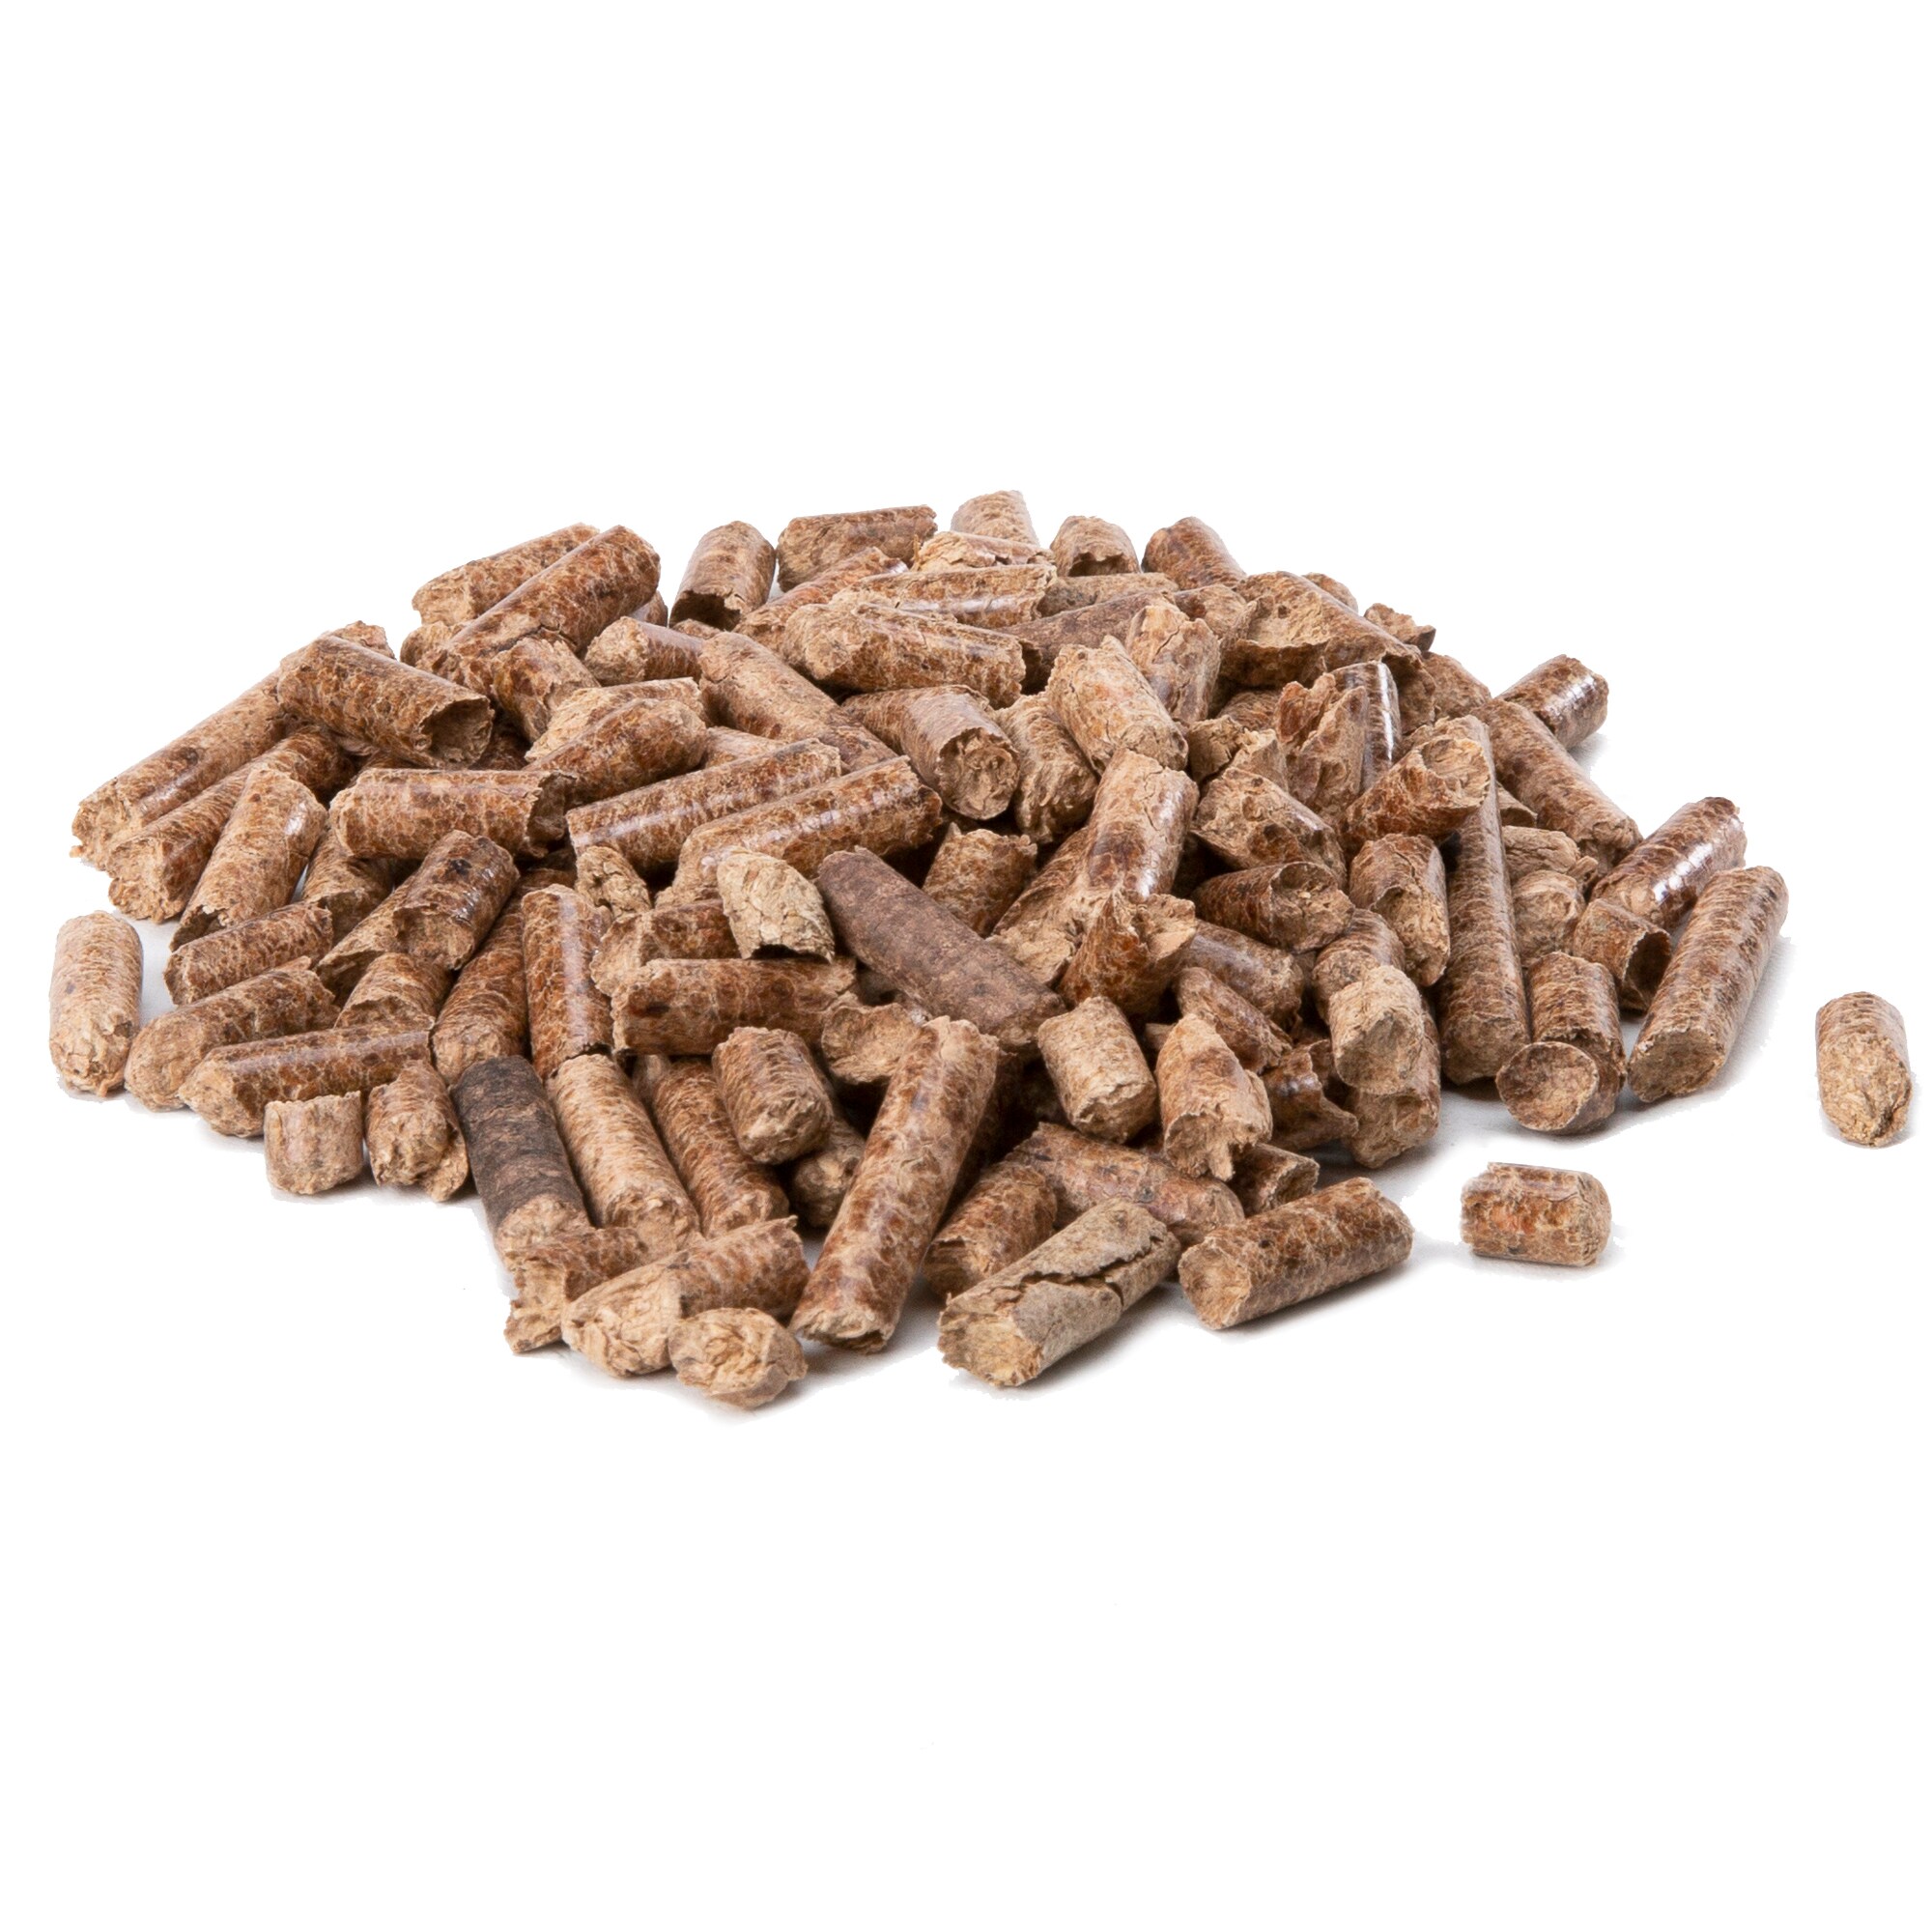 Natural 2 Pack BBQ Wood Pellets Competition Blend New Imported Pit Boss 40 lbs 